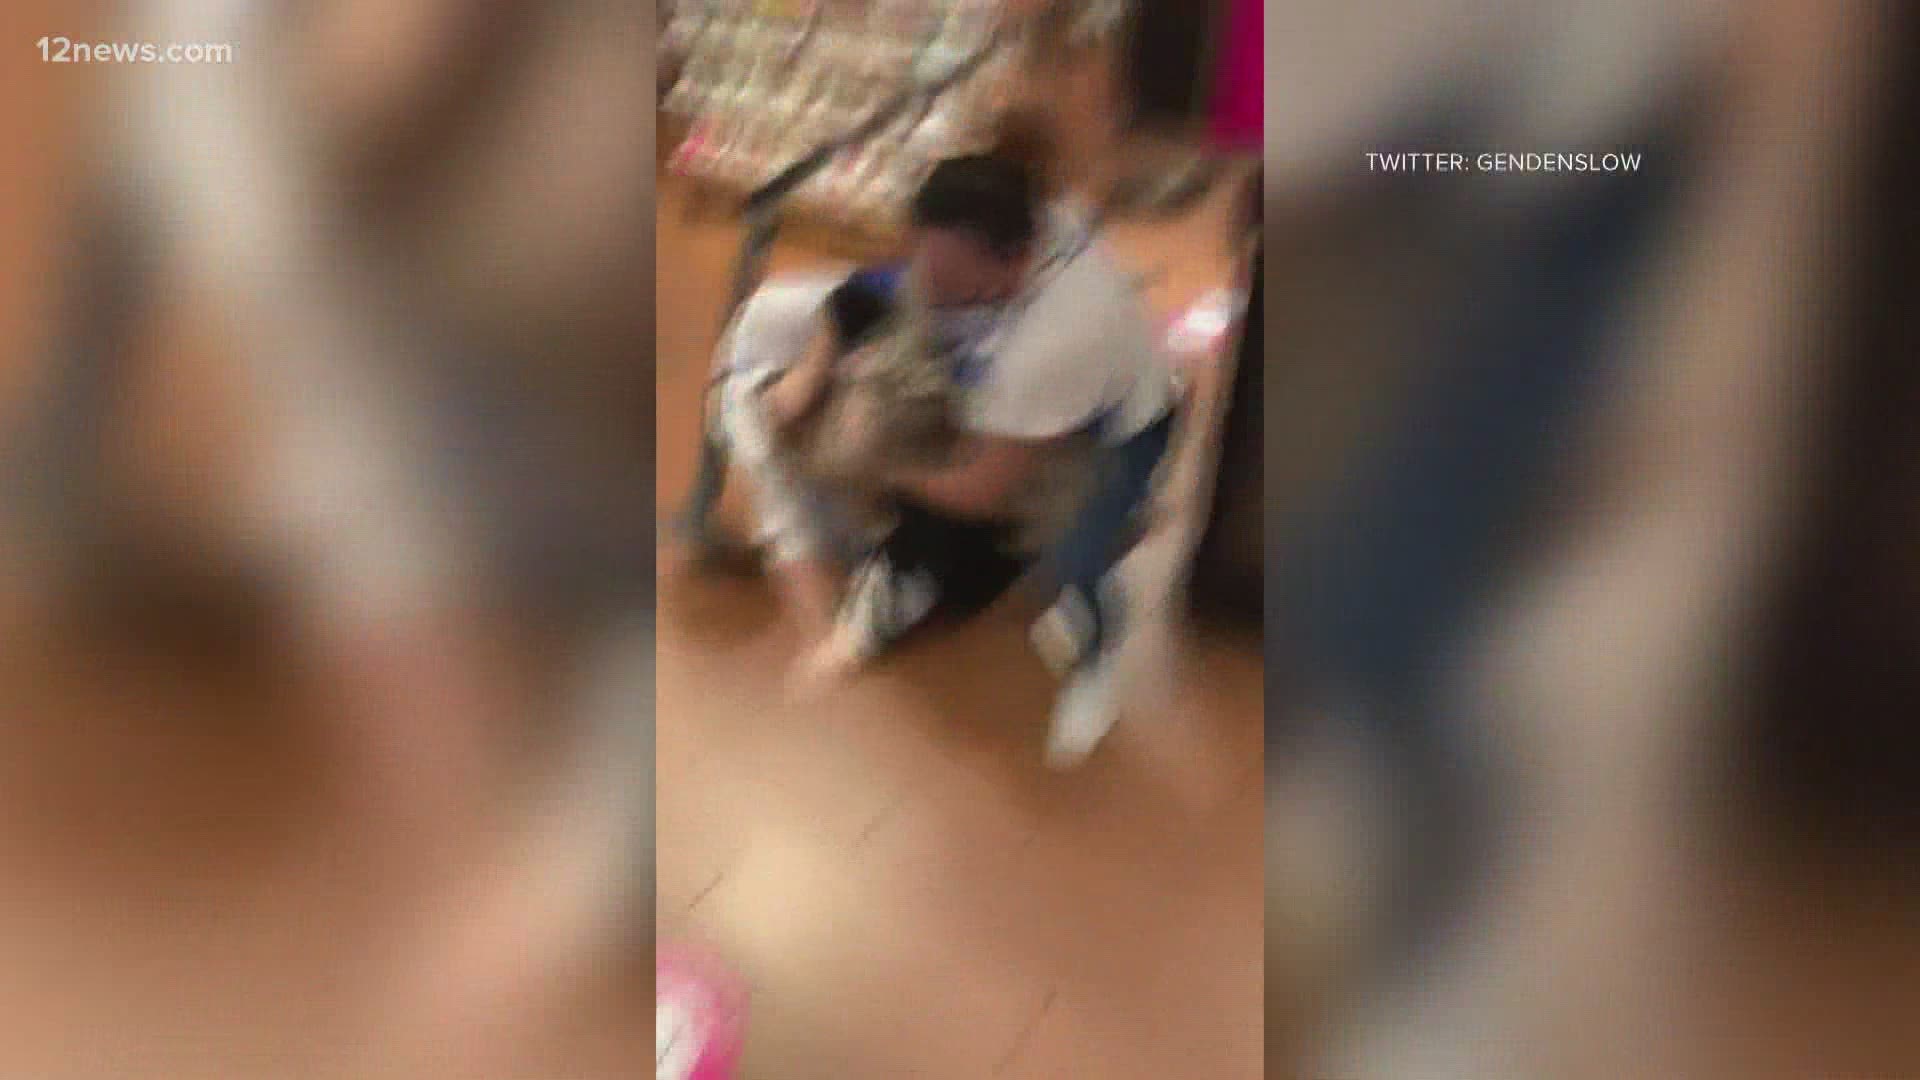 A customer and two employees at the Bath & Body Works store inside Scottsdale Fashion Square were involved in a fight on Saturday afternoon, according to police.